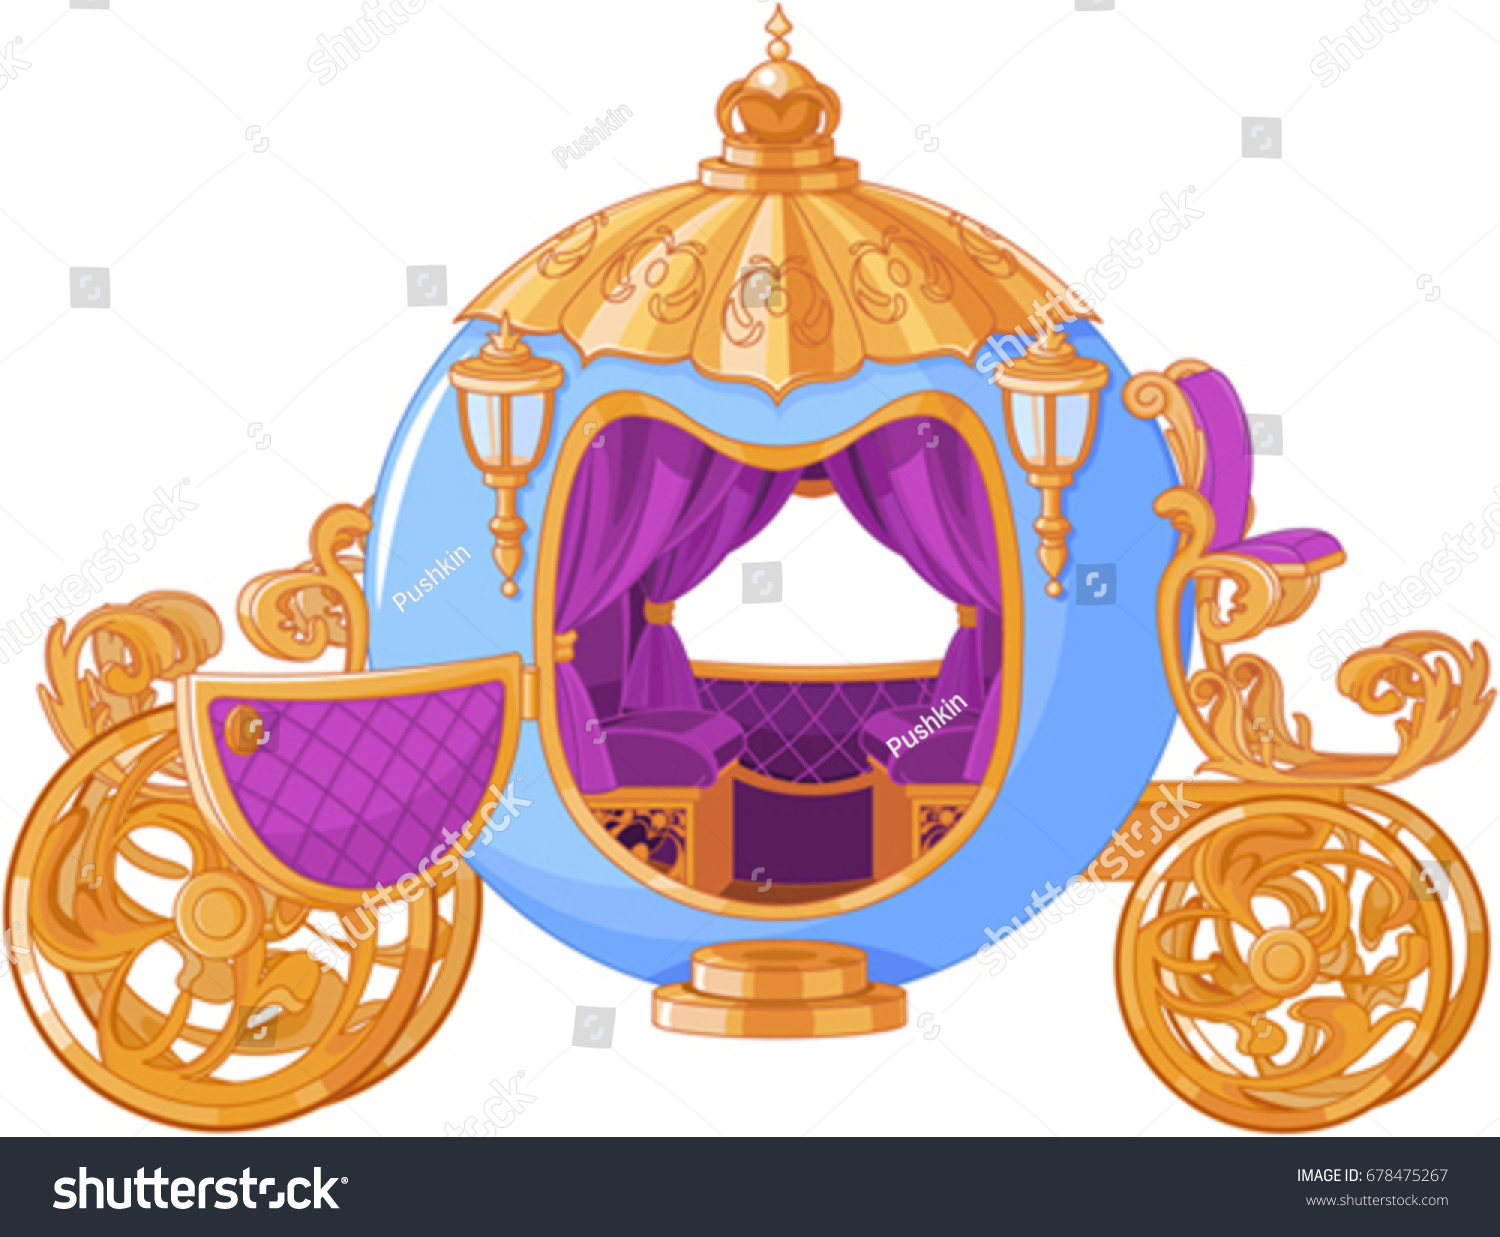 SVG of Illustration of Cinderella fairy tale carriage  svg